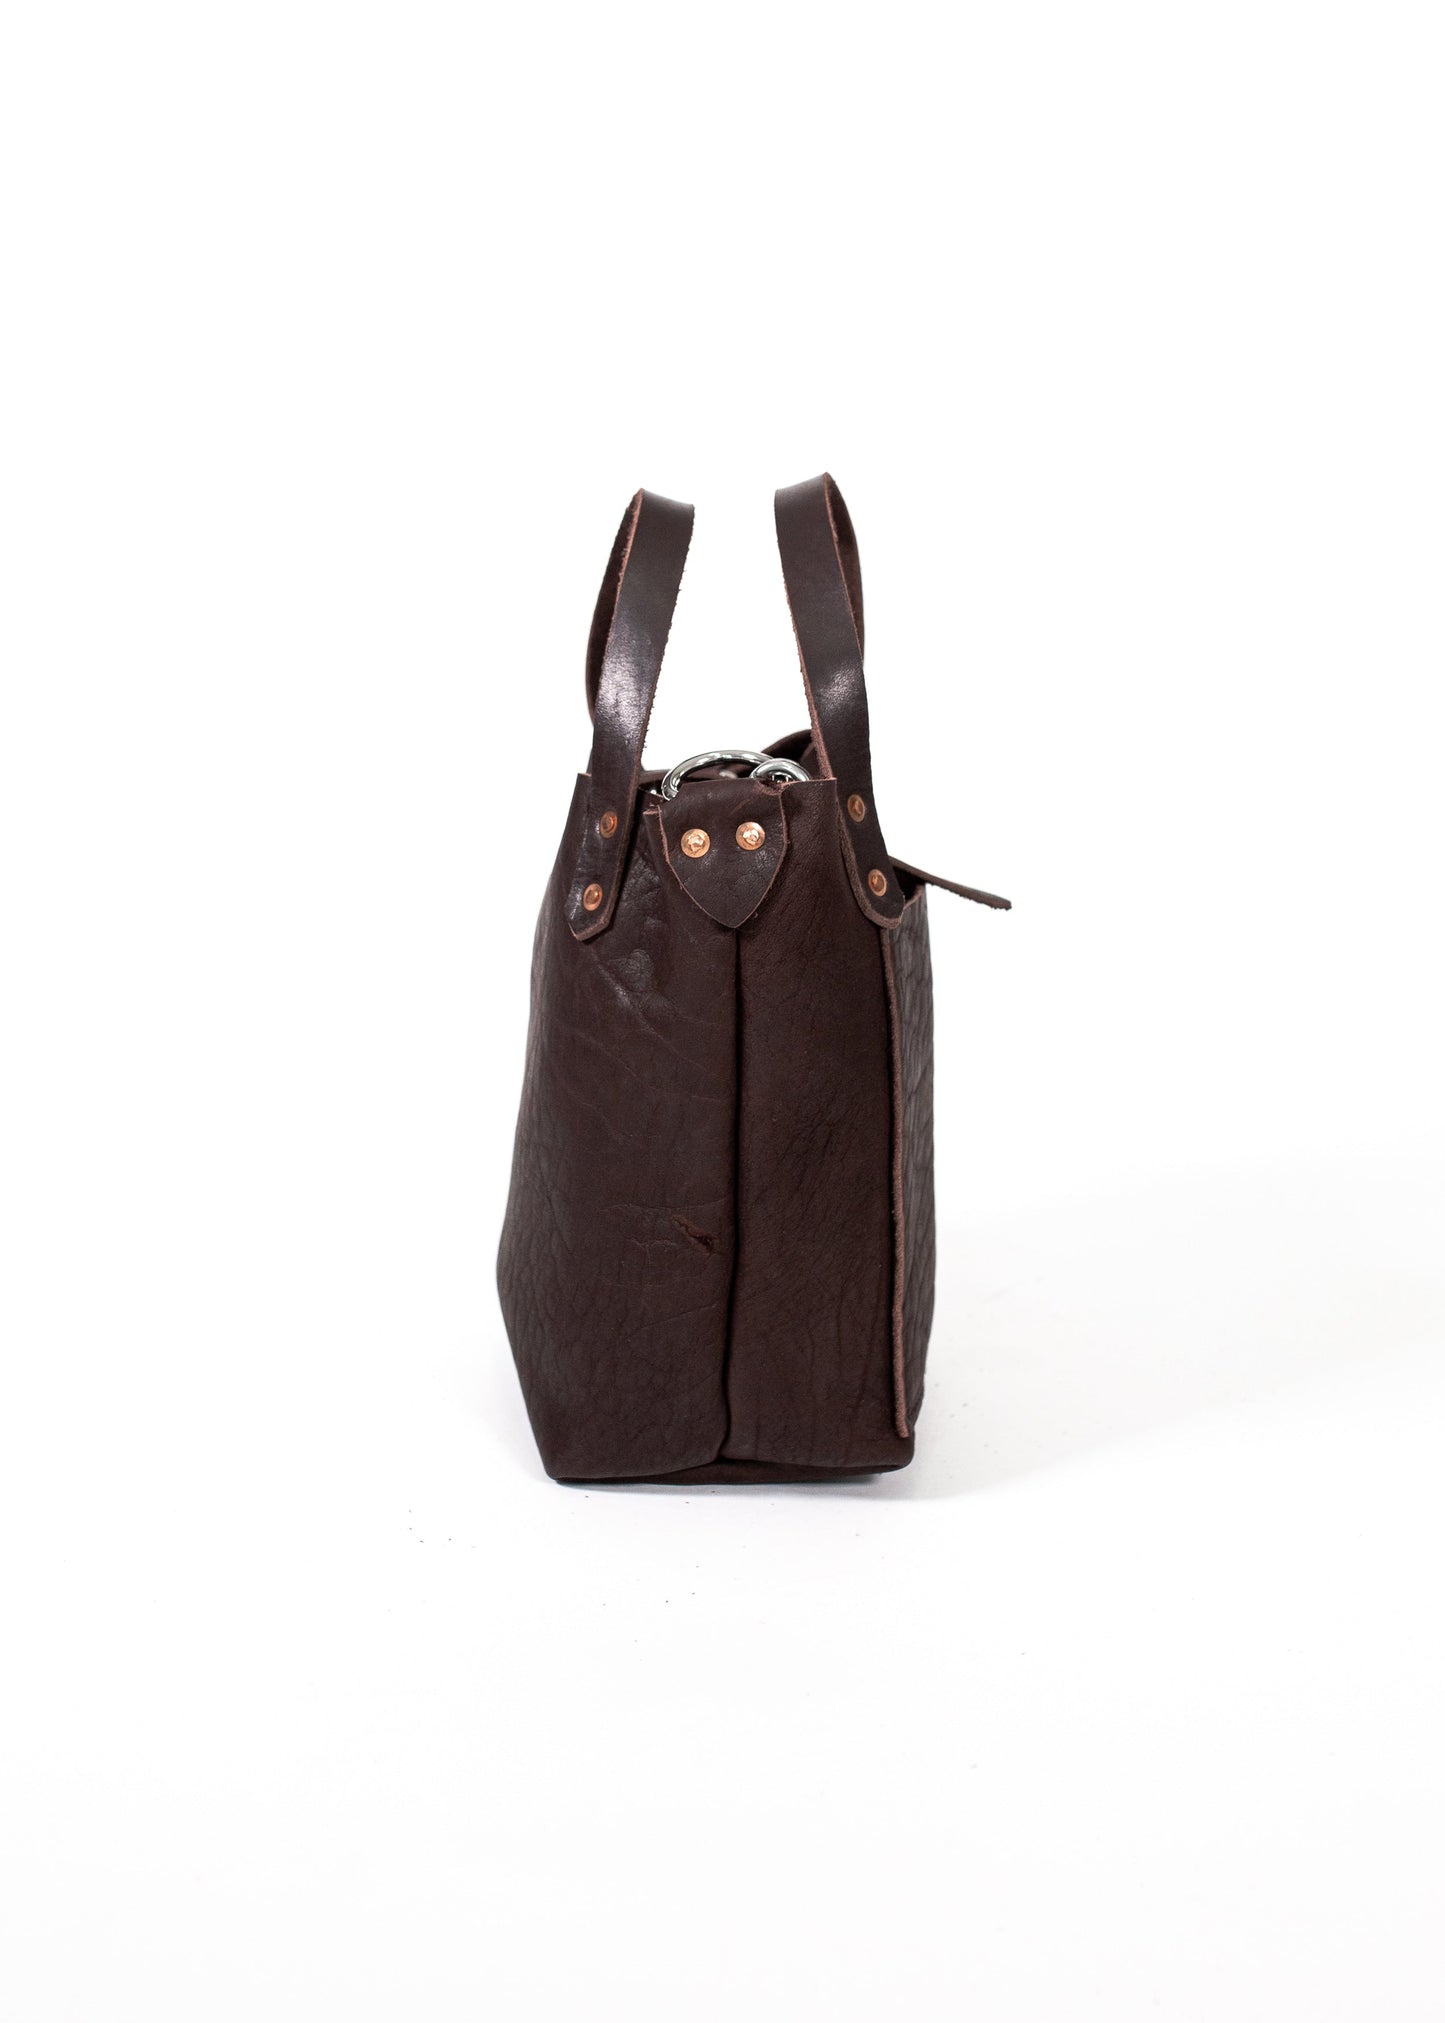 Bison Mary Purse